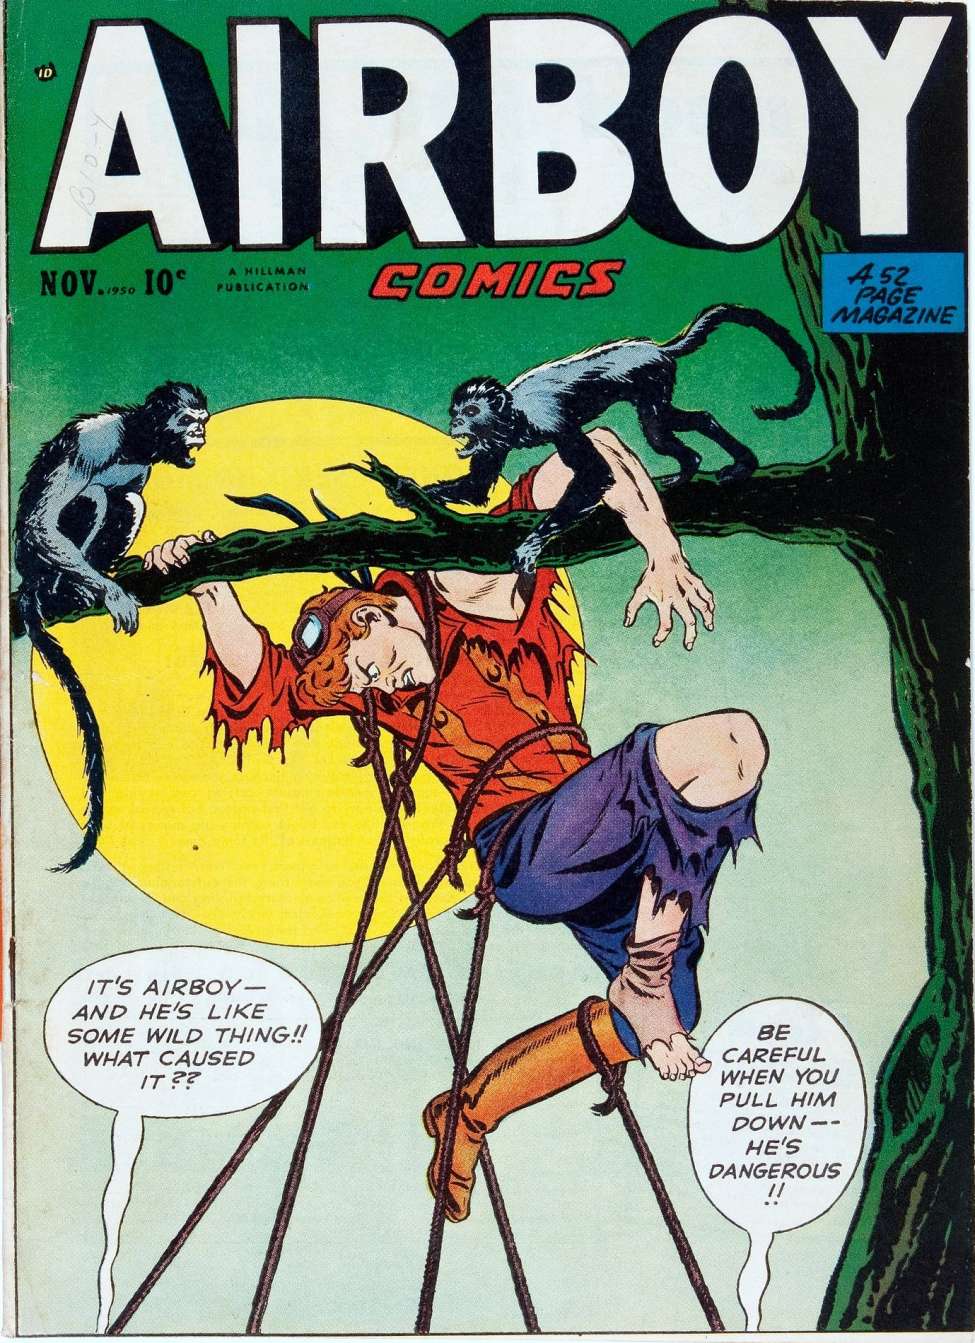 Comic Book Cover For Airboy Comics v7 10